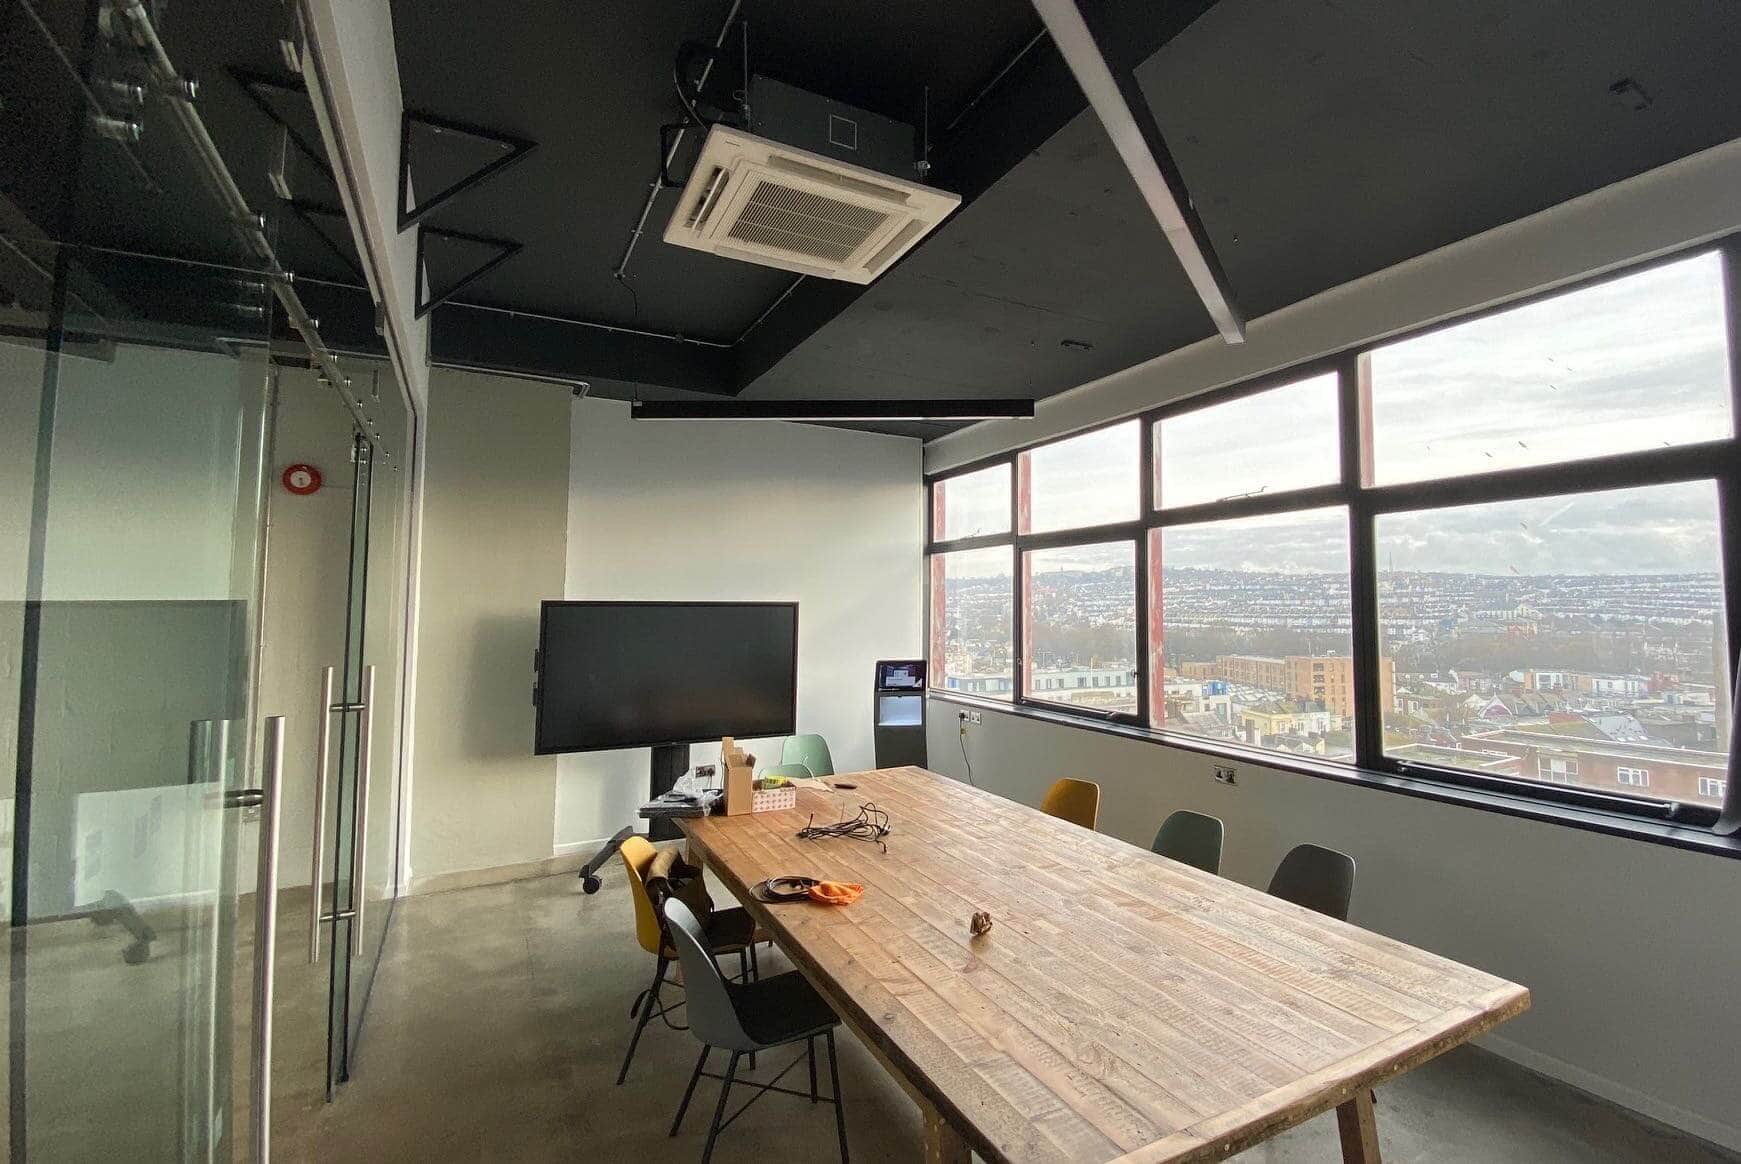 Hack & Craft Brighton office ceiling cassette air conditioning unit in meeting room with view